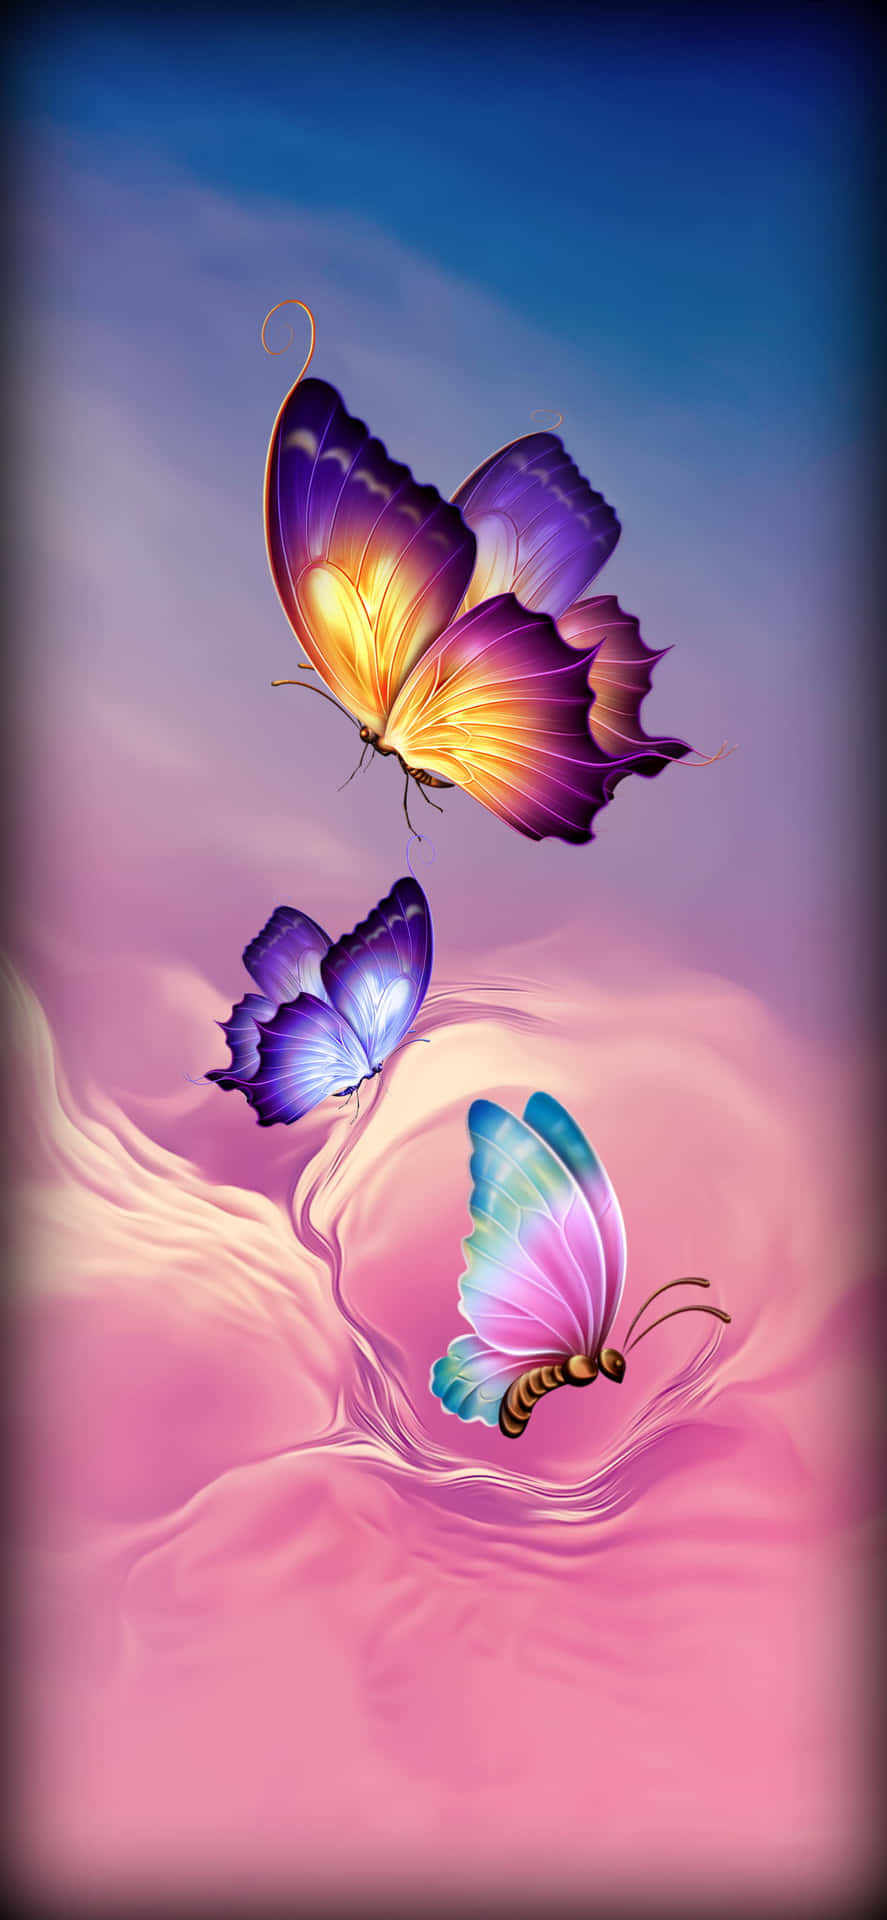 A Picture Of Butterflies Flying In The Air